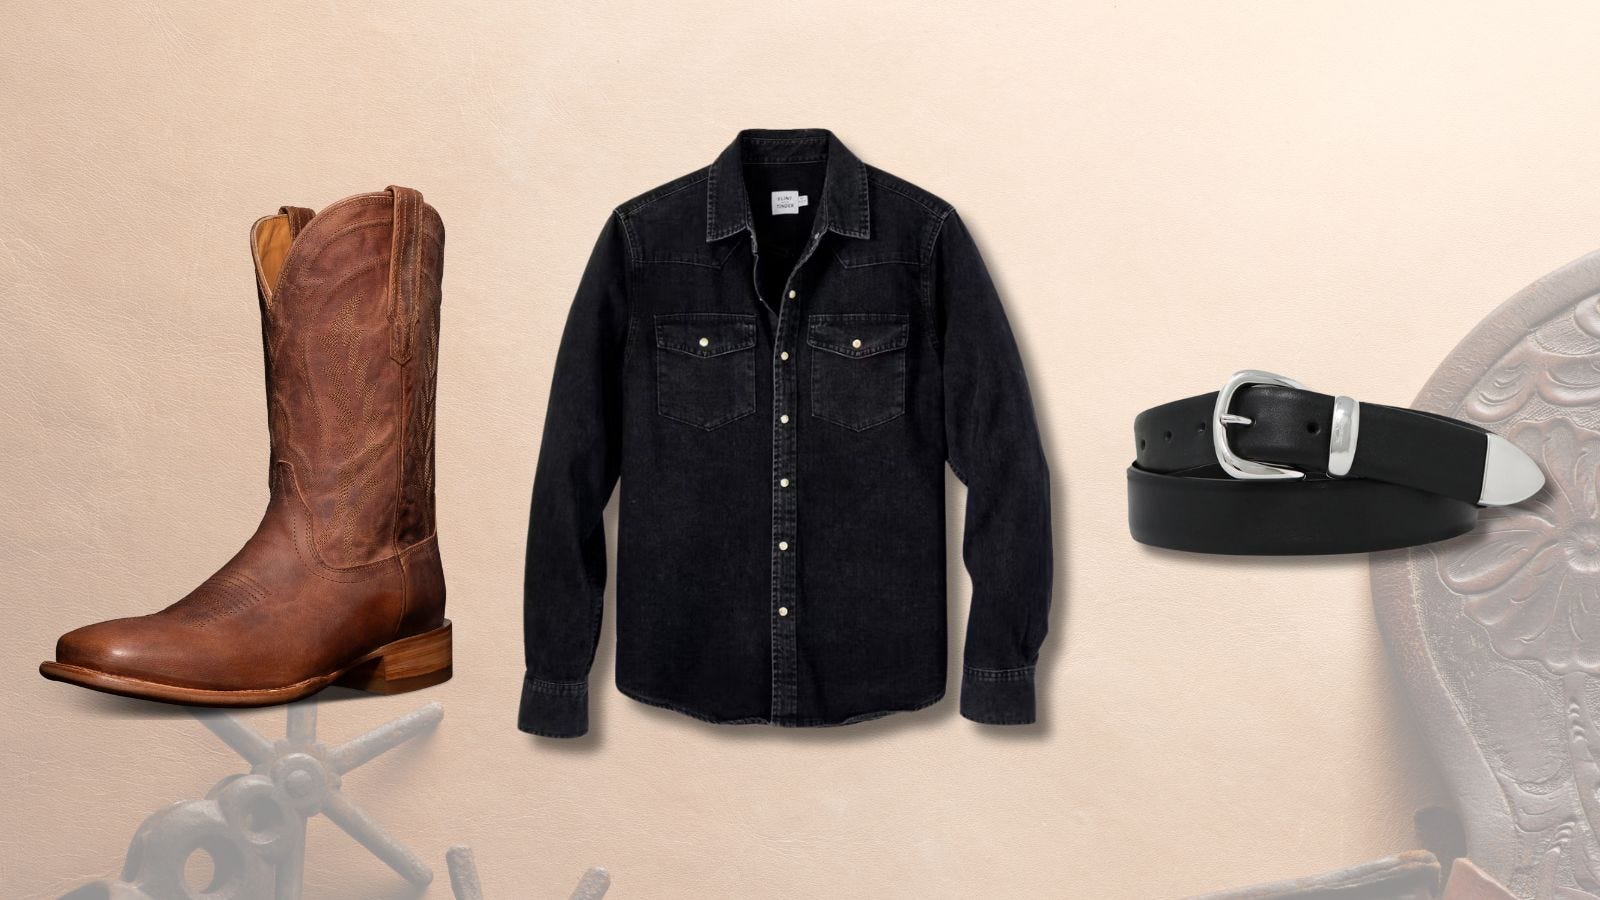 three product images set against a western-themed background, from left to right: brown cowboy boots, a black, button-front denim shirt, and a black belt with silver buckle